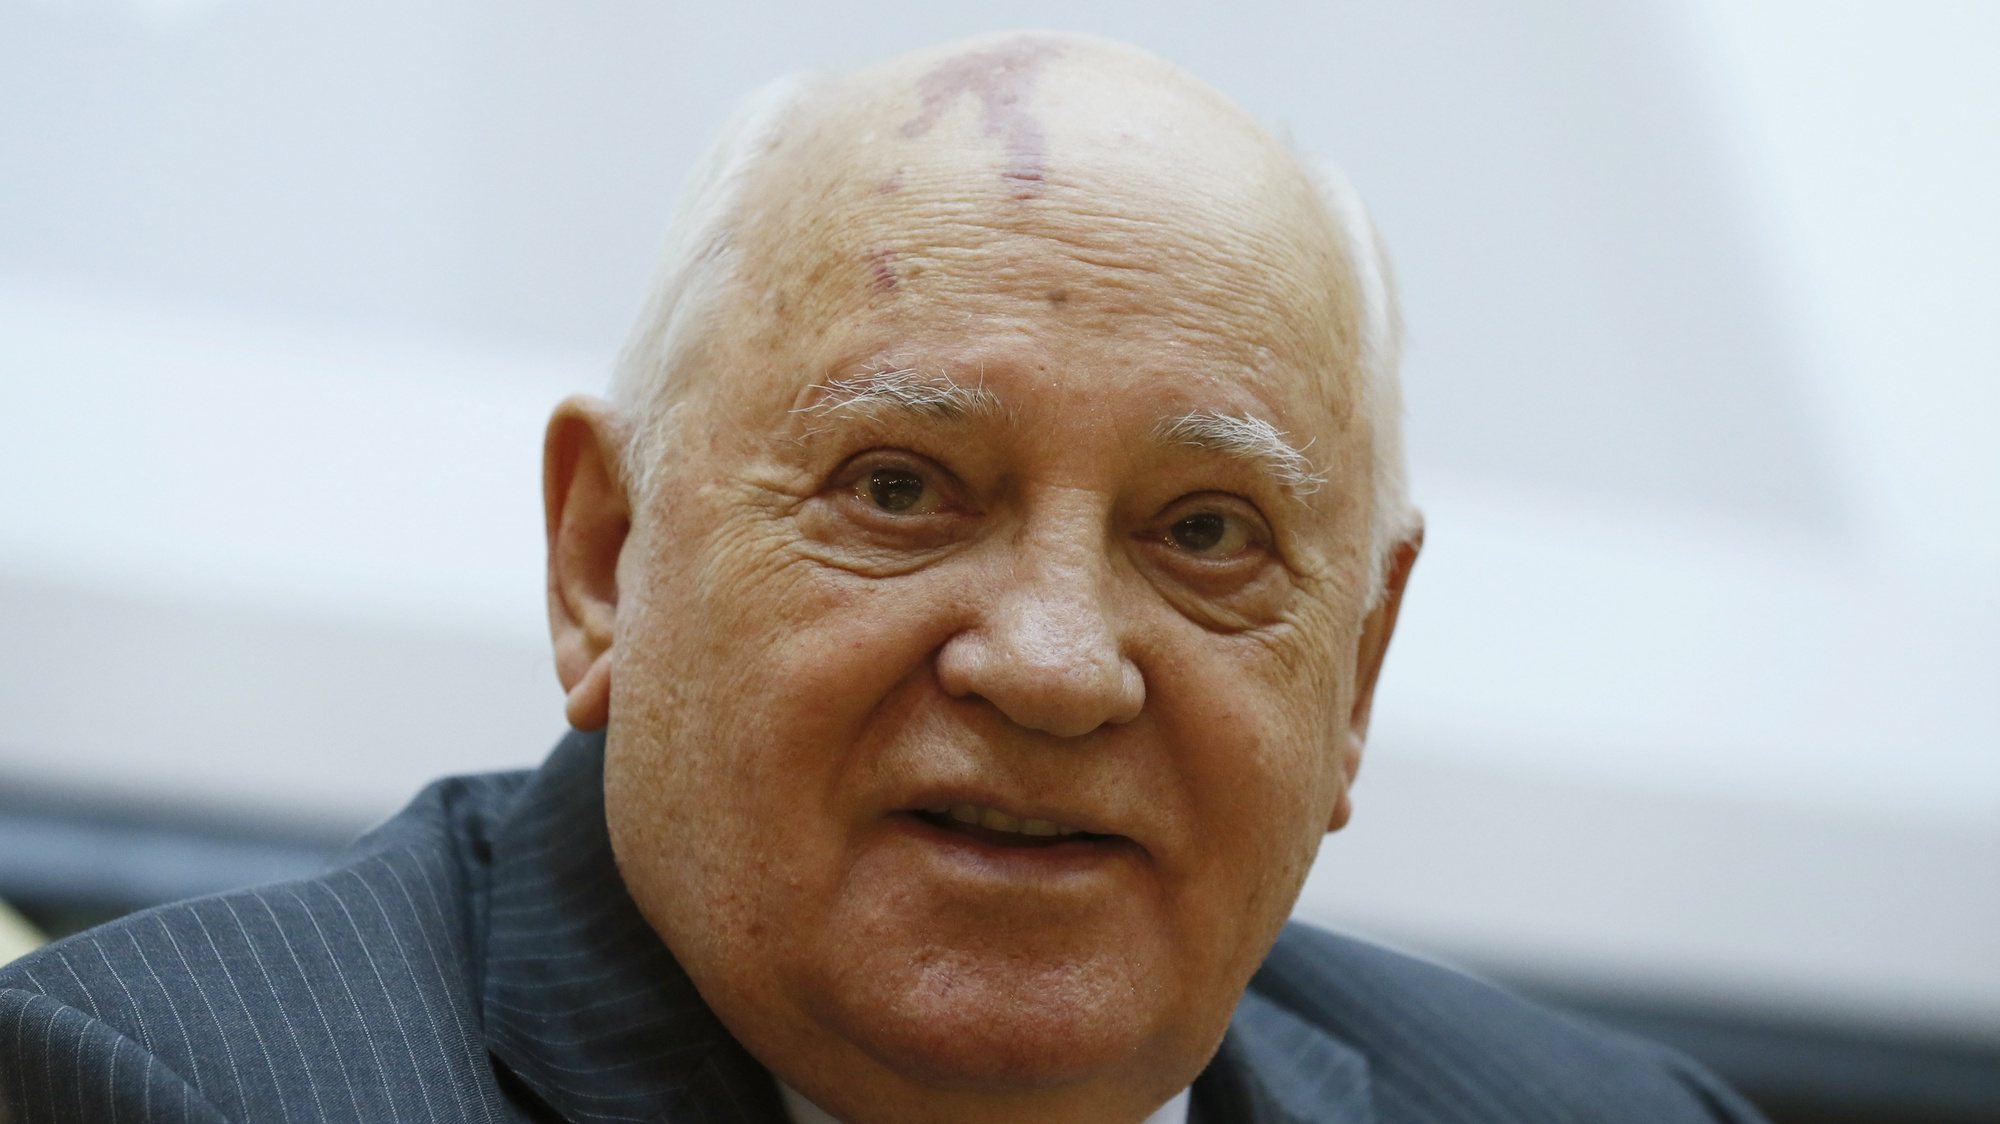 epa10148328 (FILE) - epa05187480 Former Soviet leader Mikhail Gorbachev smiles during the presentation of a new book titled &#039;Gorbachev in life&#039;, published by the Gorbachev Fund in Moscow, Russia, 29 February 2016 (reissued 30 August 2022). According to a Moscow Central Clinical Hospital statement, former Soviet president Mikhail Gorbachev has died at the age of 91. As a supporter of the de-Stalinization programs of his predecessor Nikita Khrushchev, Gorbachev initiated numerous reforms during his tenure. He signed a nuclear arms treaty with the United States and withdrew the Soviet Union from the Soviet-Afghan war. His policies created freedom of speech and press, and decentralized fiscal policy planning and execution to increase efficiency. Gorbachev was the last leader of the Soviet Union, overseeing Russiaâ€™s transition from one party rule to fragile democracy.  EPA/SERGEI ILNITSKY